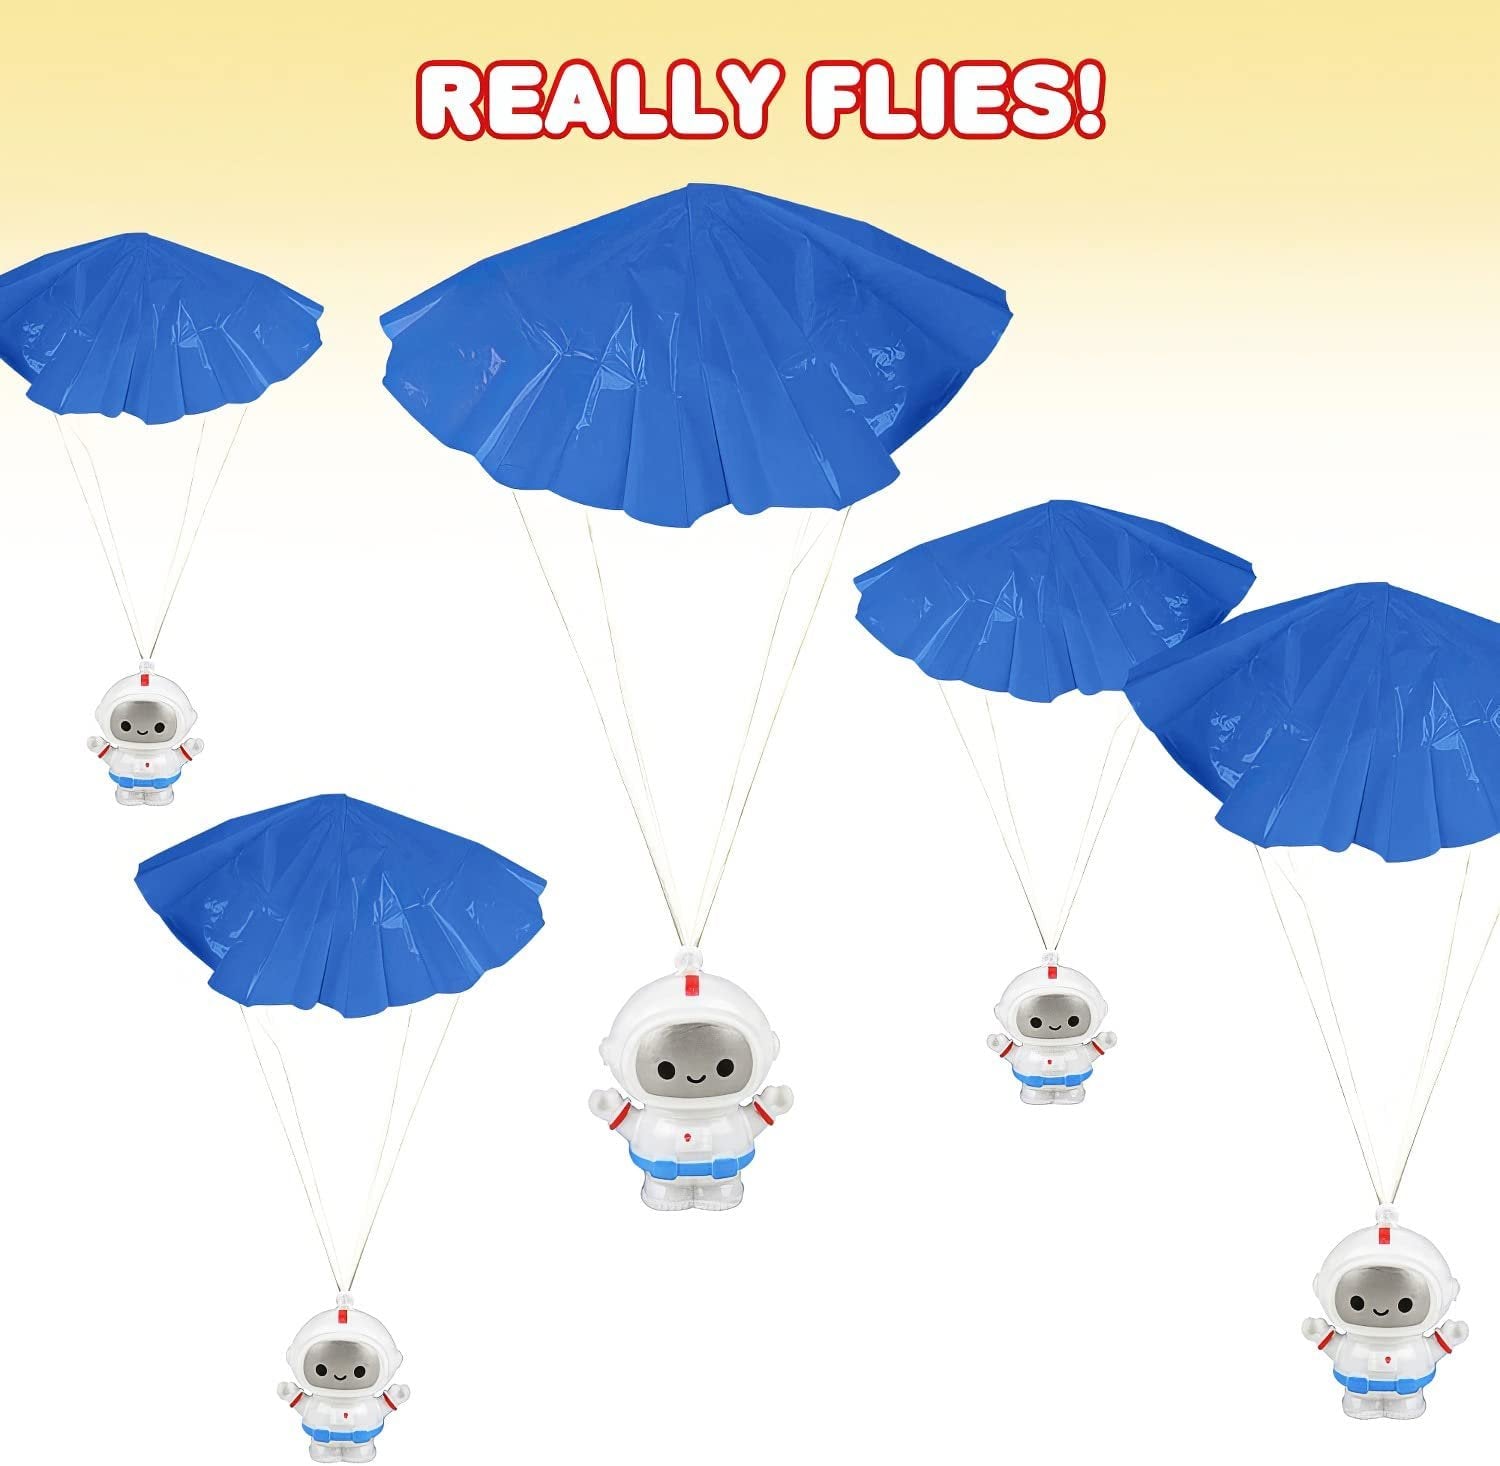 ArtCreativity Mini Astronaut Paratroopers with Parachutes, Bulk Pack of 24, Durable Plastic Parachute Toys Playset, Fun Parachute Party Favors, Goodie Bag Fillers for Boys and Girls